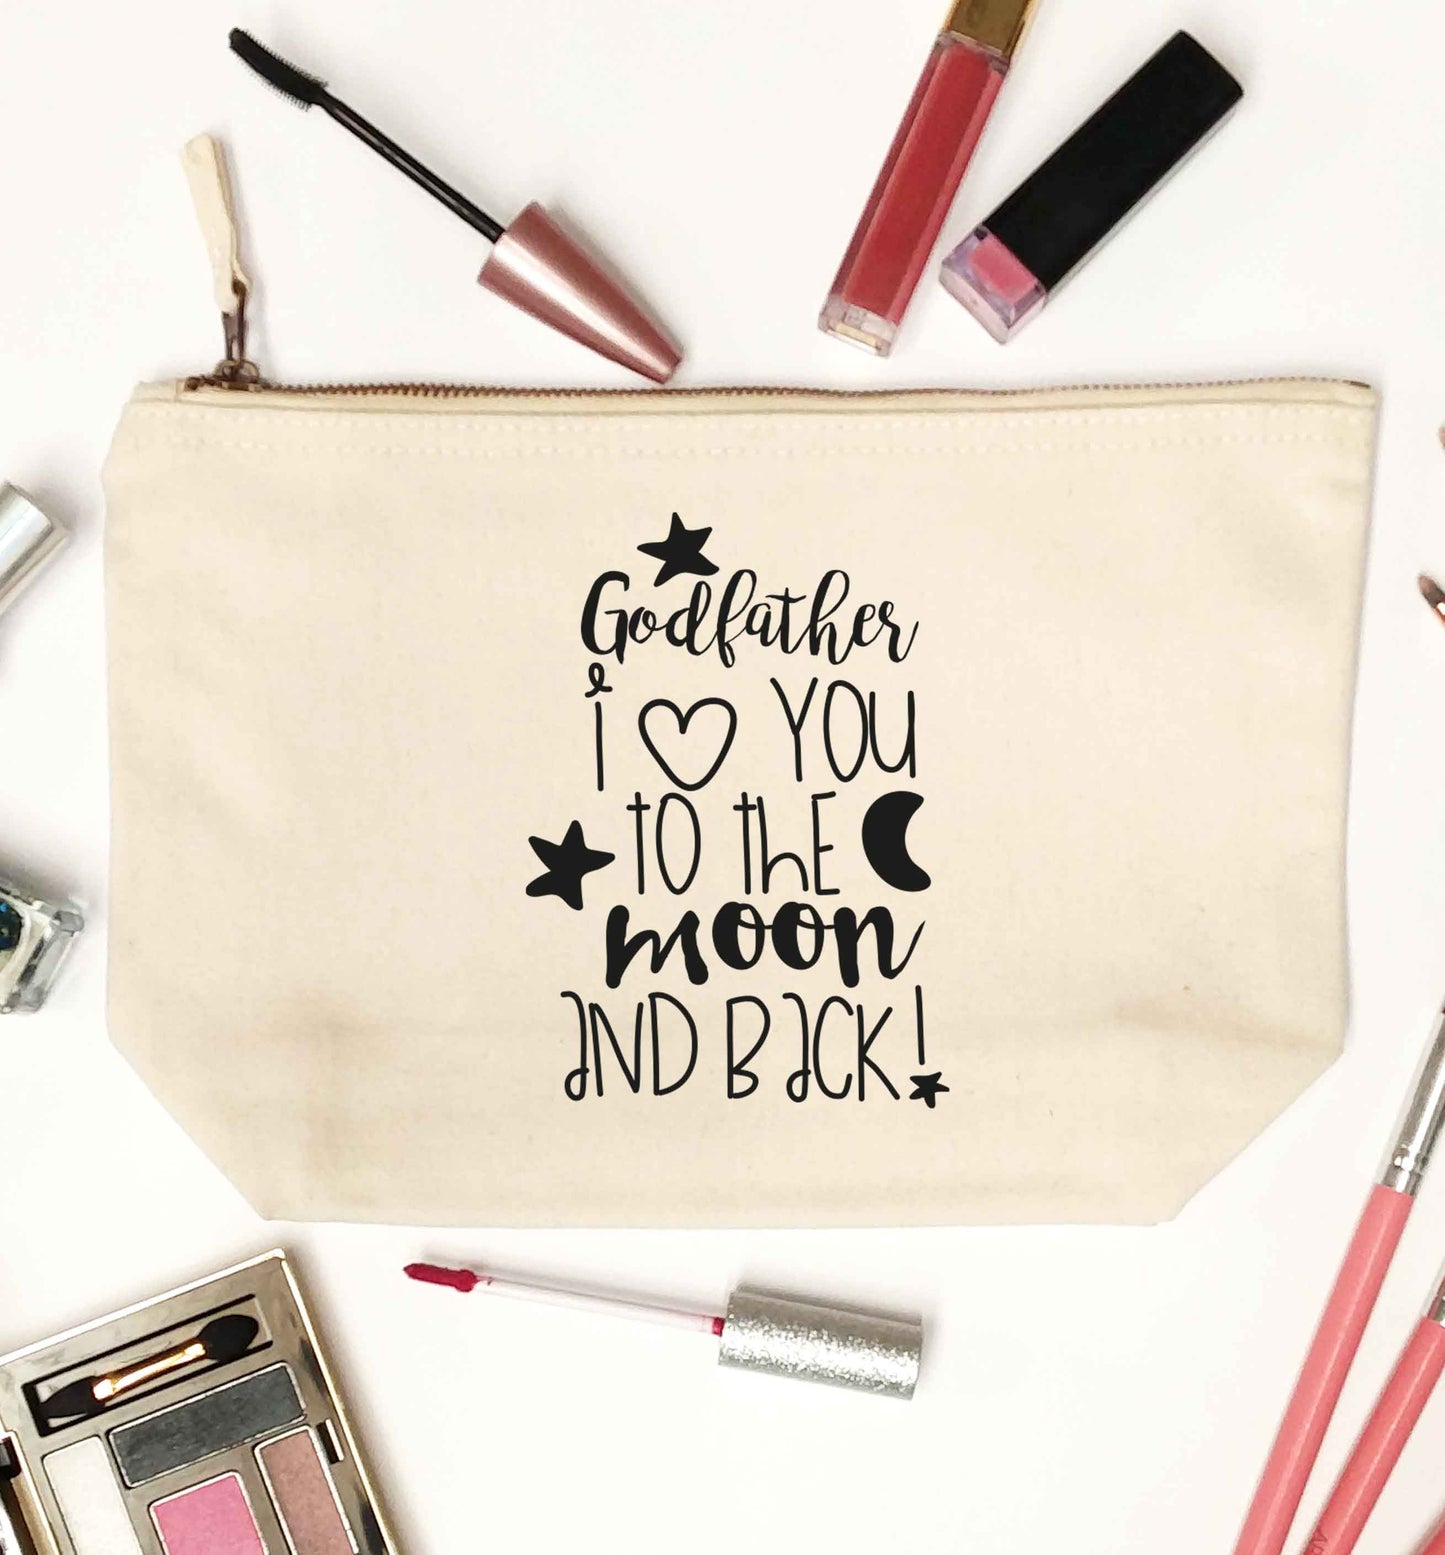 Godfather I love you to the moon and back natural makeup bag